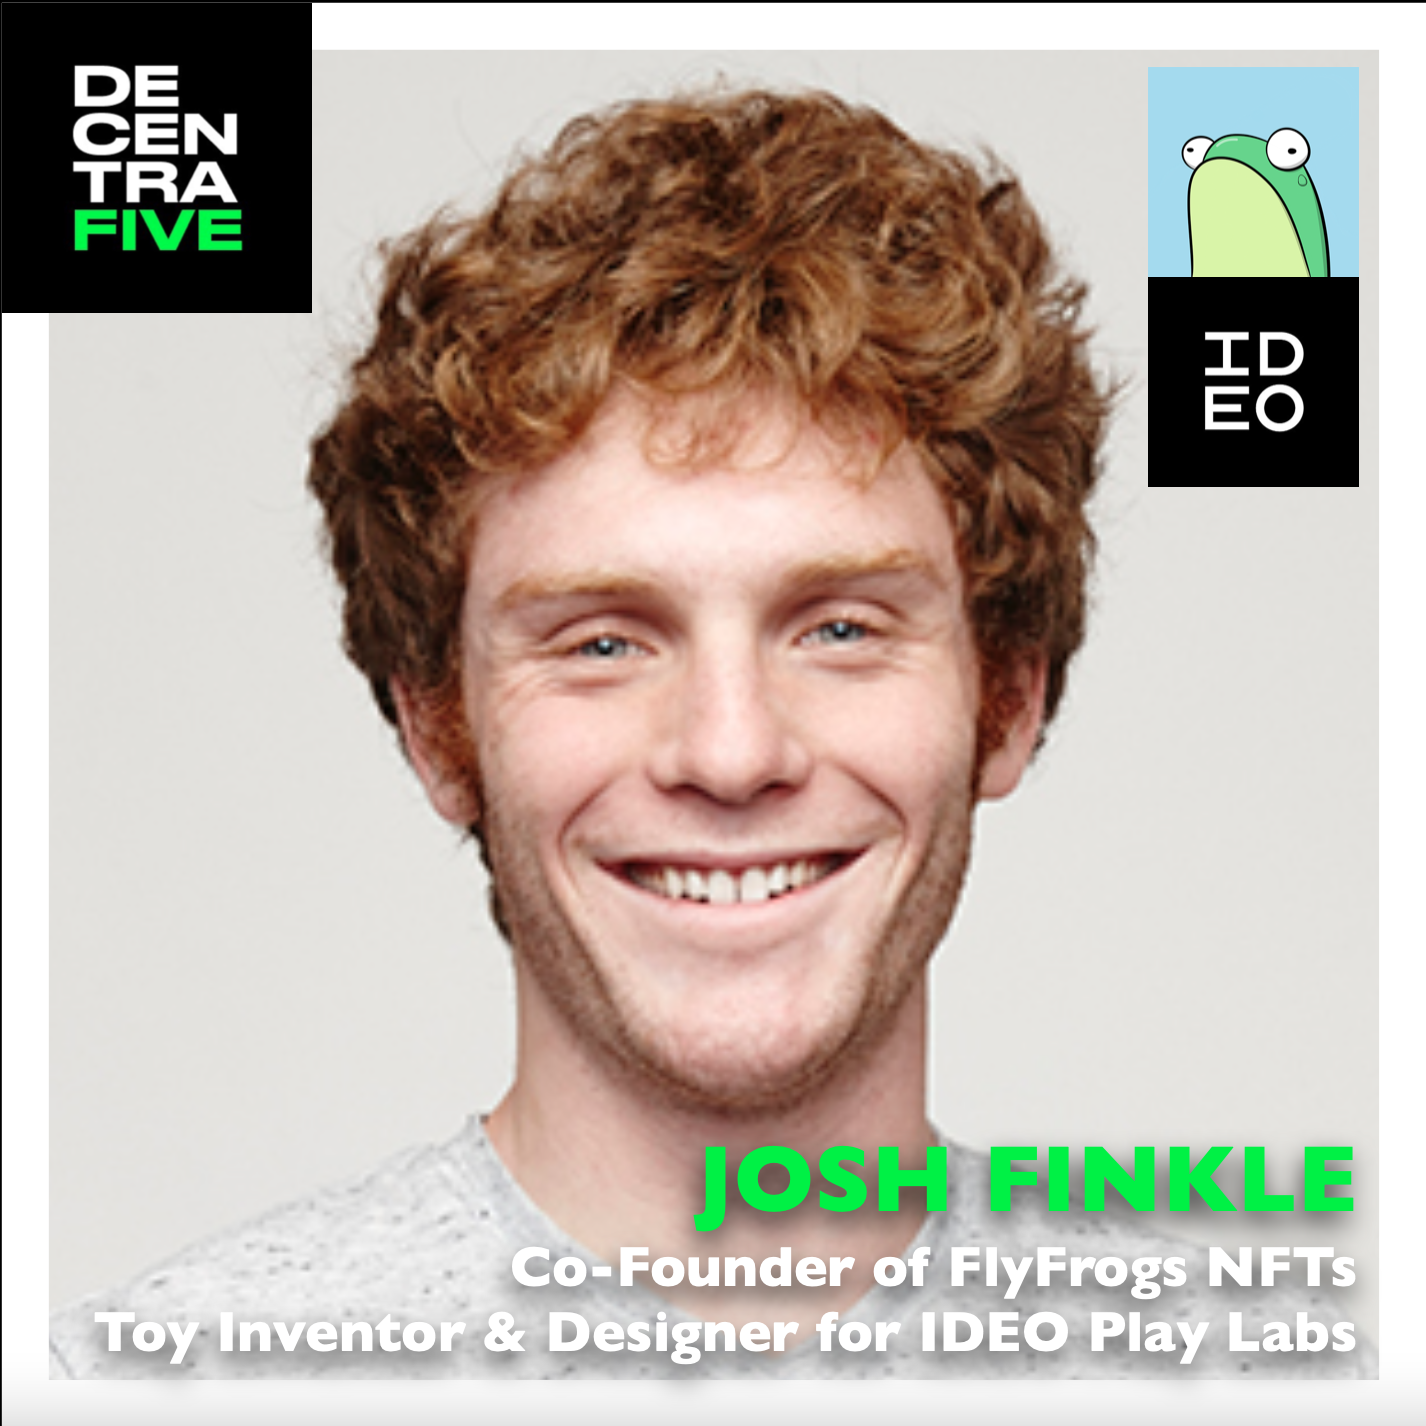 Josh Finkle | Co-Founder of the @FlyFrogsNFT Project | Toy Inventor & Designer for @IDEO Play Labs | on @DECENTRAFIVE hosted by @LiveSent Image